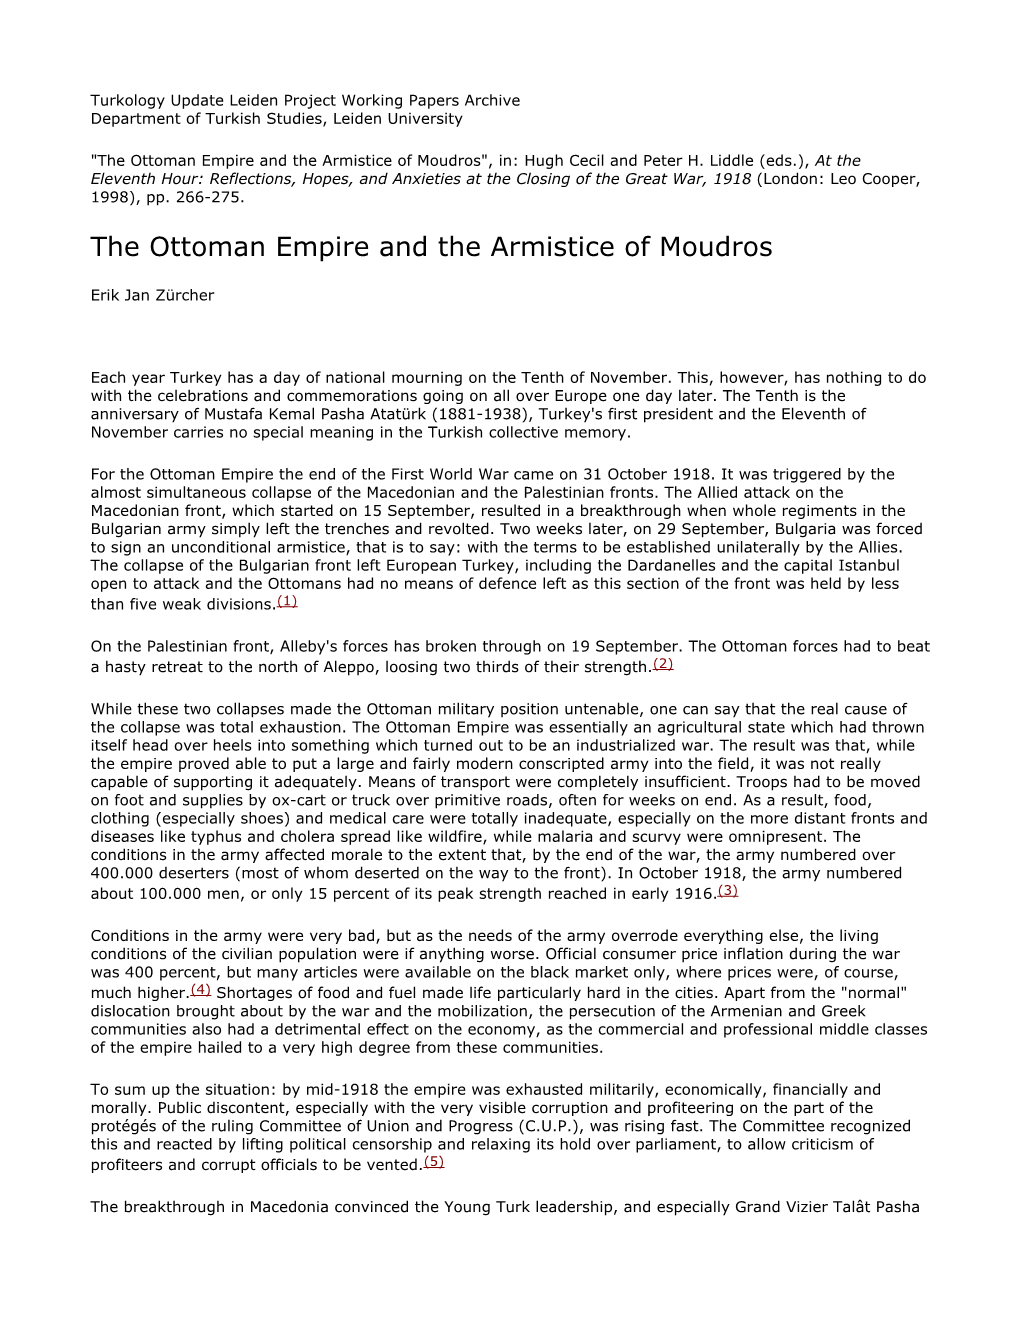 The Ottoman Empire and the Armistice of Moudros", In: Hugh Cecil and Peter H